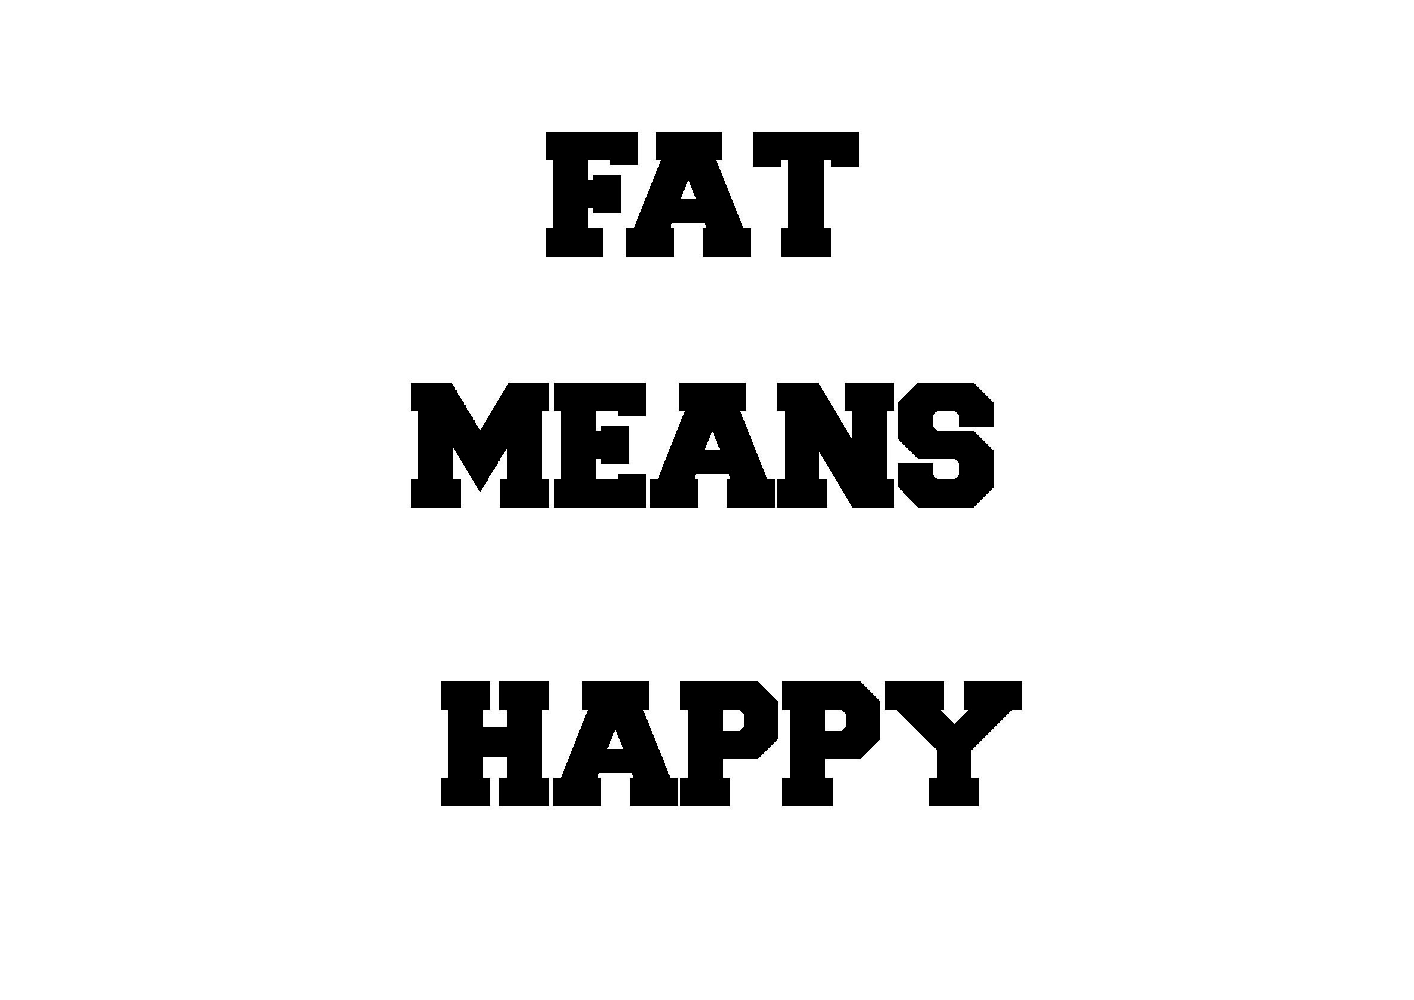 Fat mean. To be happy means